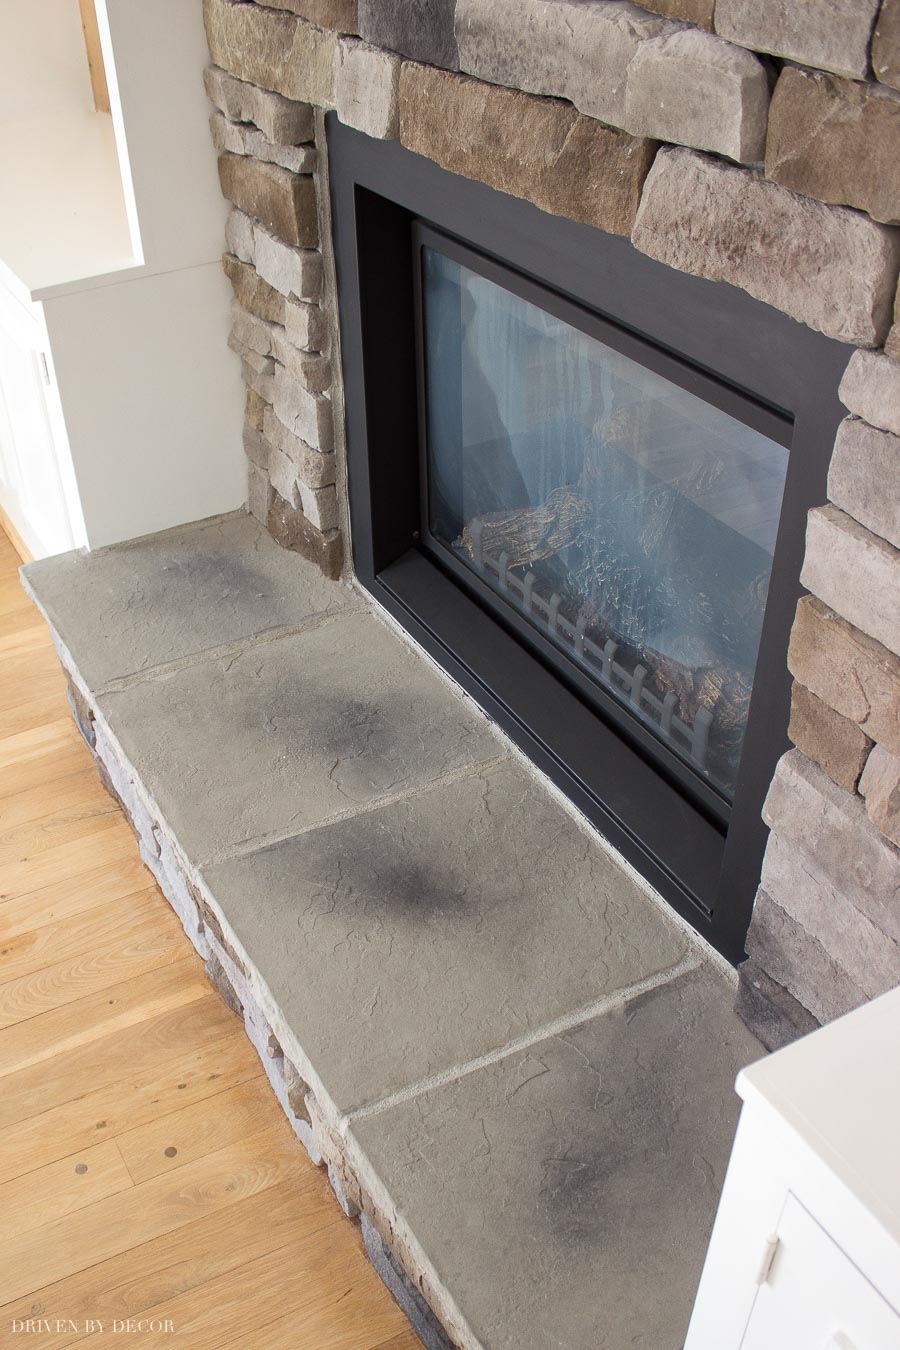 Gas Fireplace Rock Beautiful Designing A Stone Fireplace Tips for Getting It Right